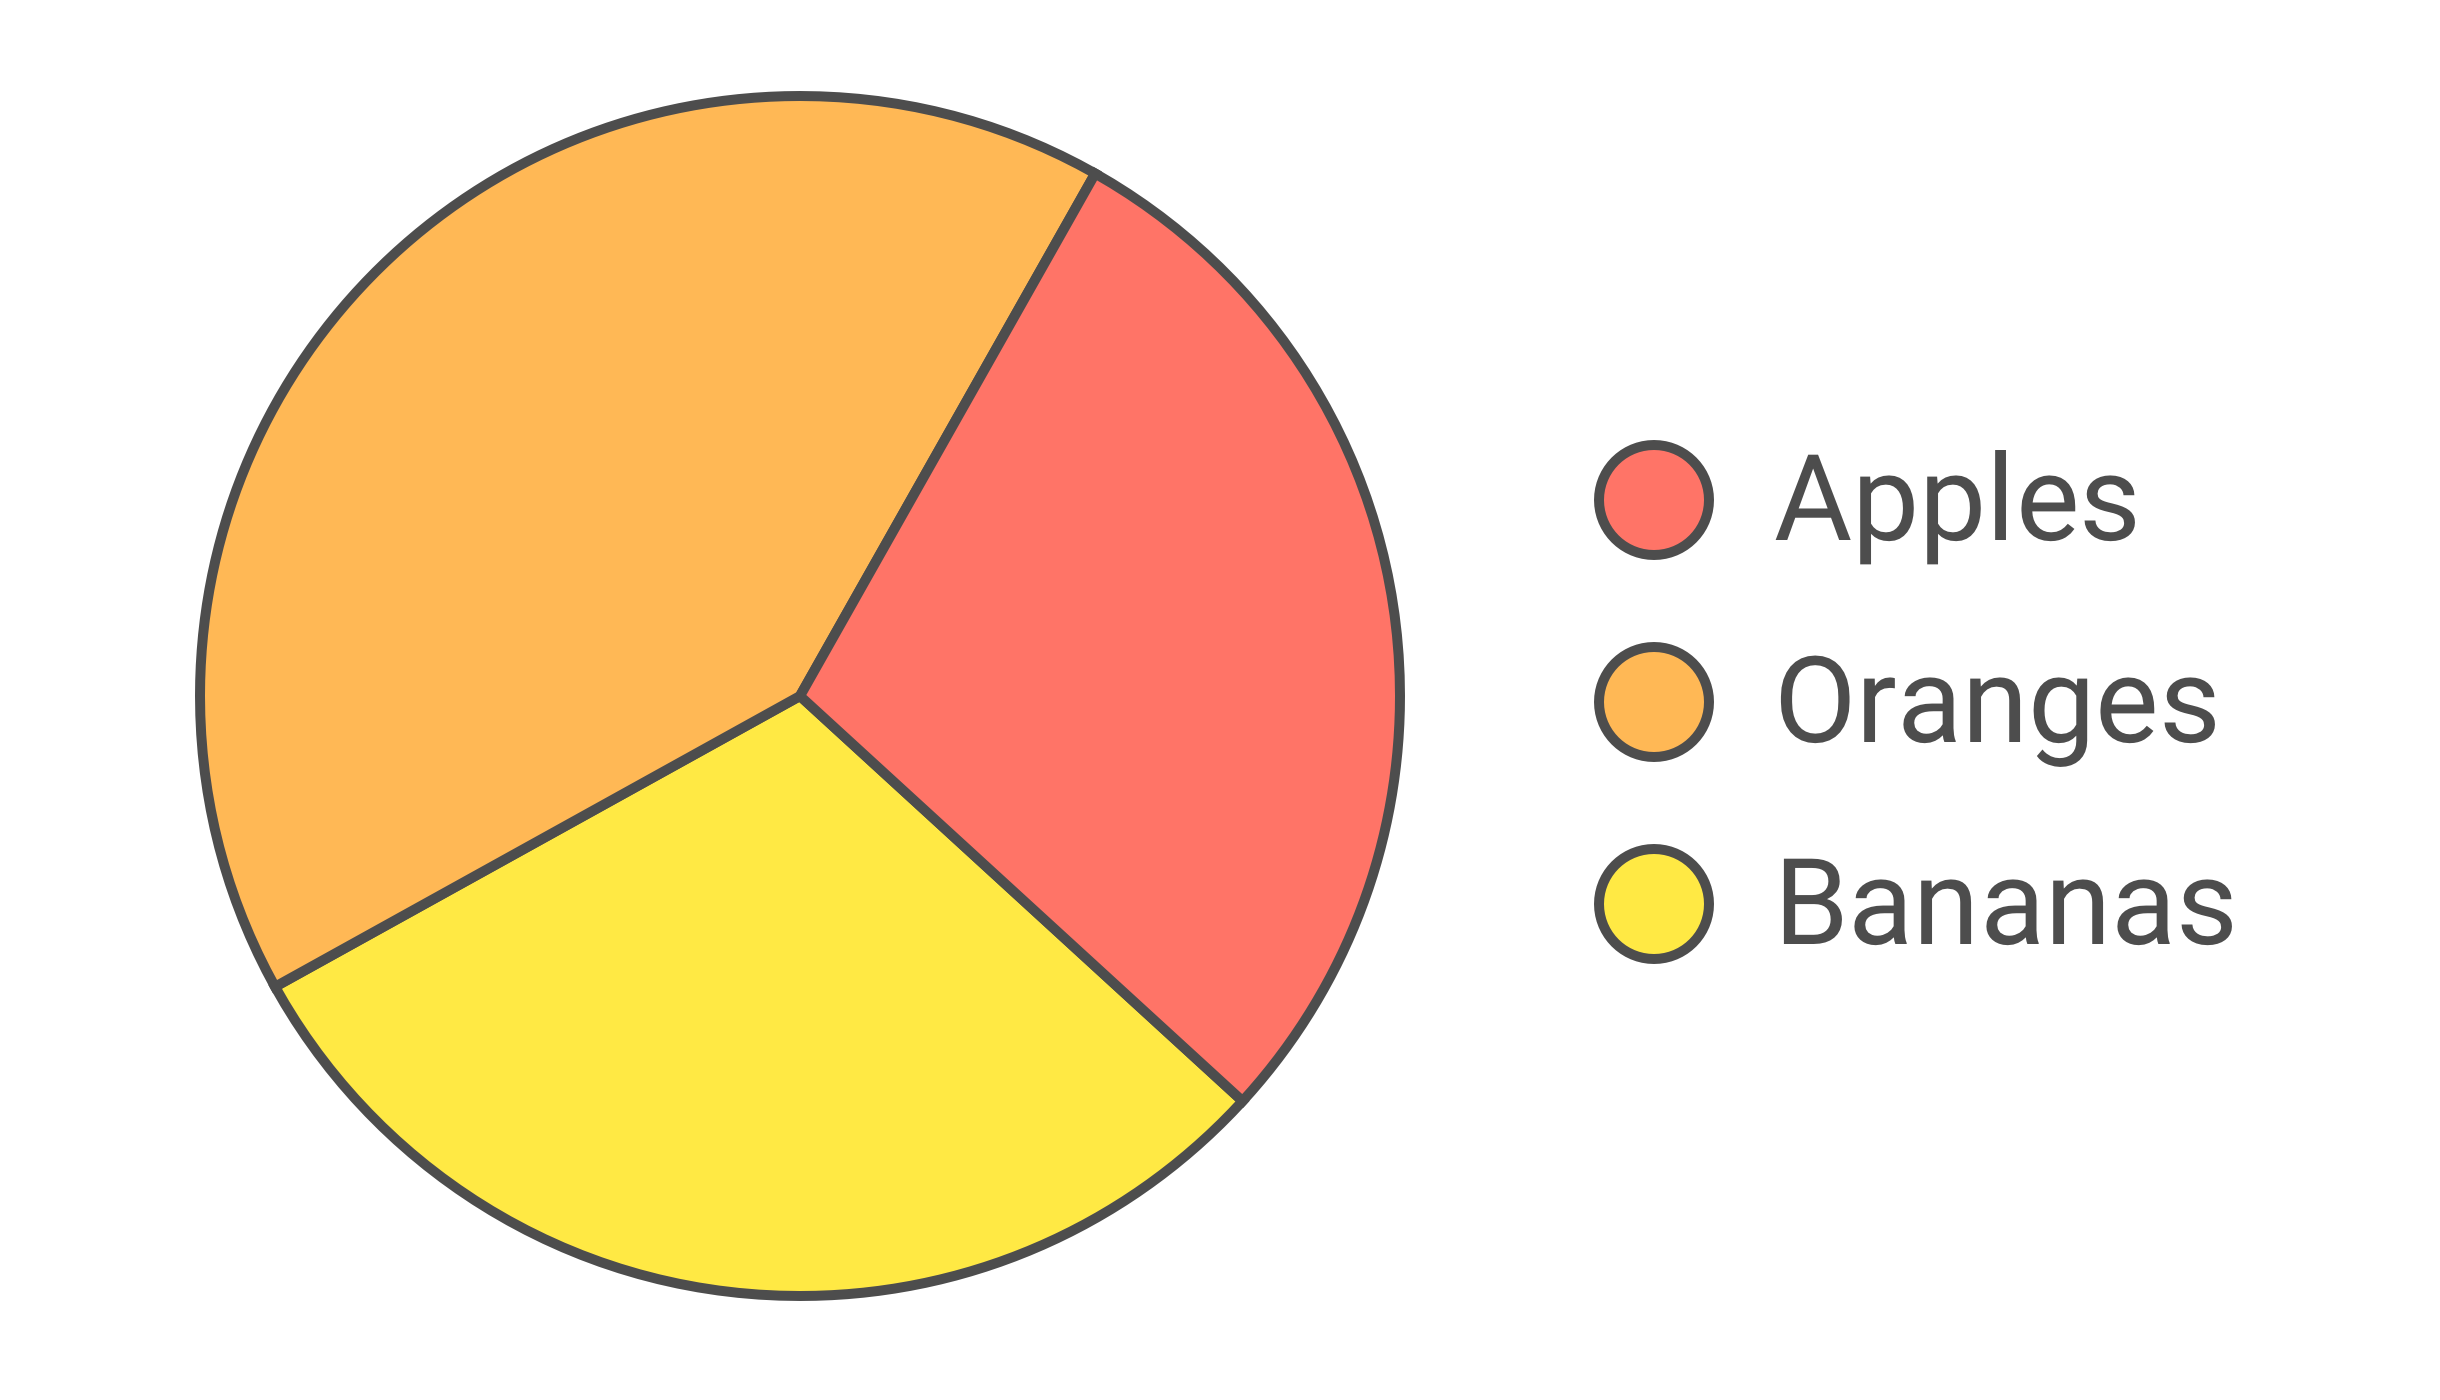 The same pie chart with a dark outline around the coloured areas